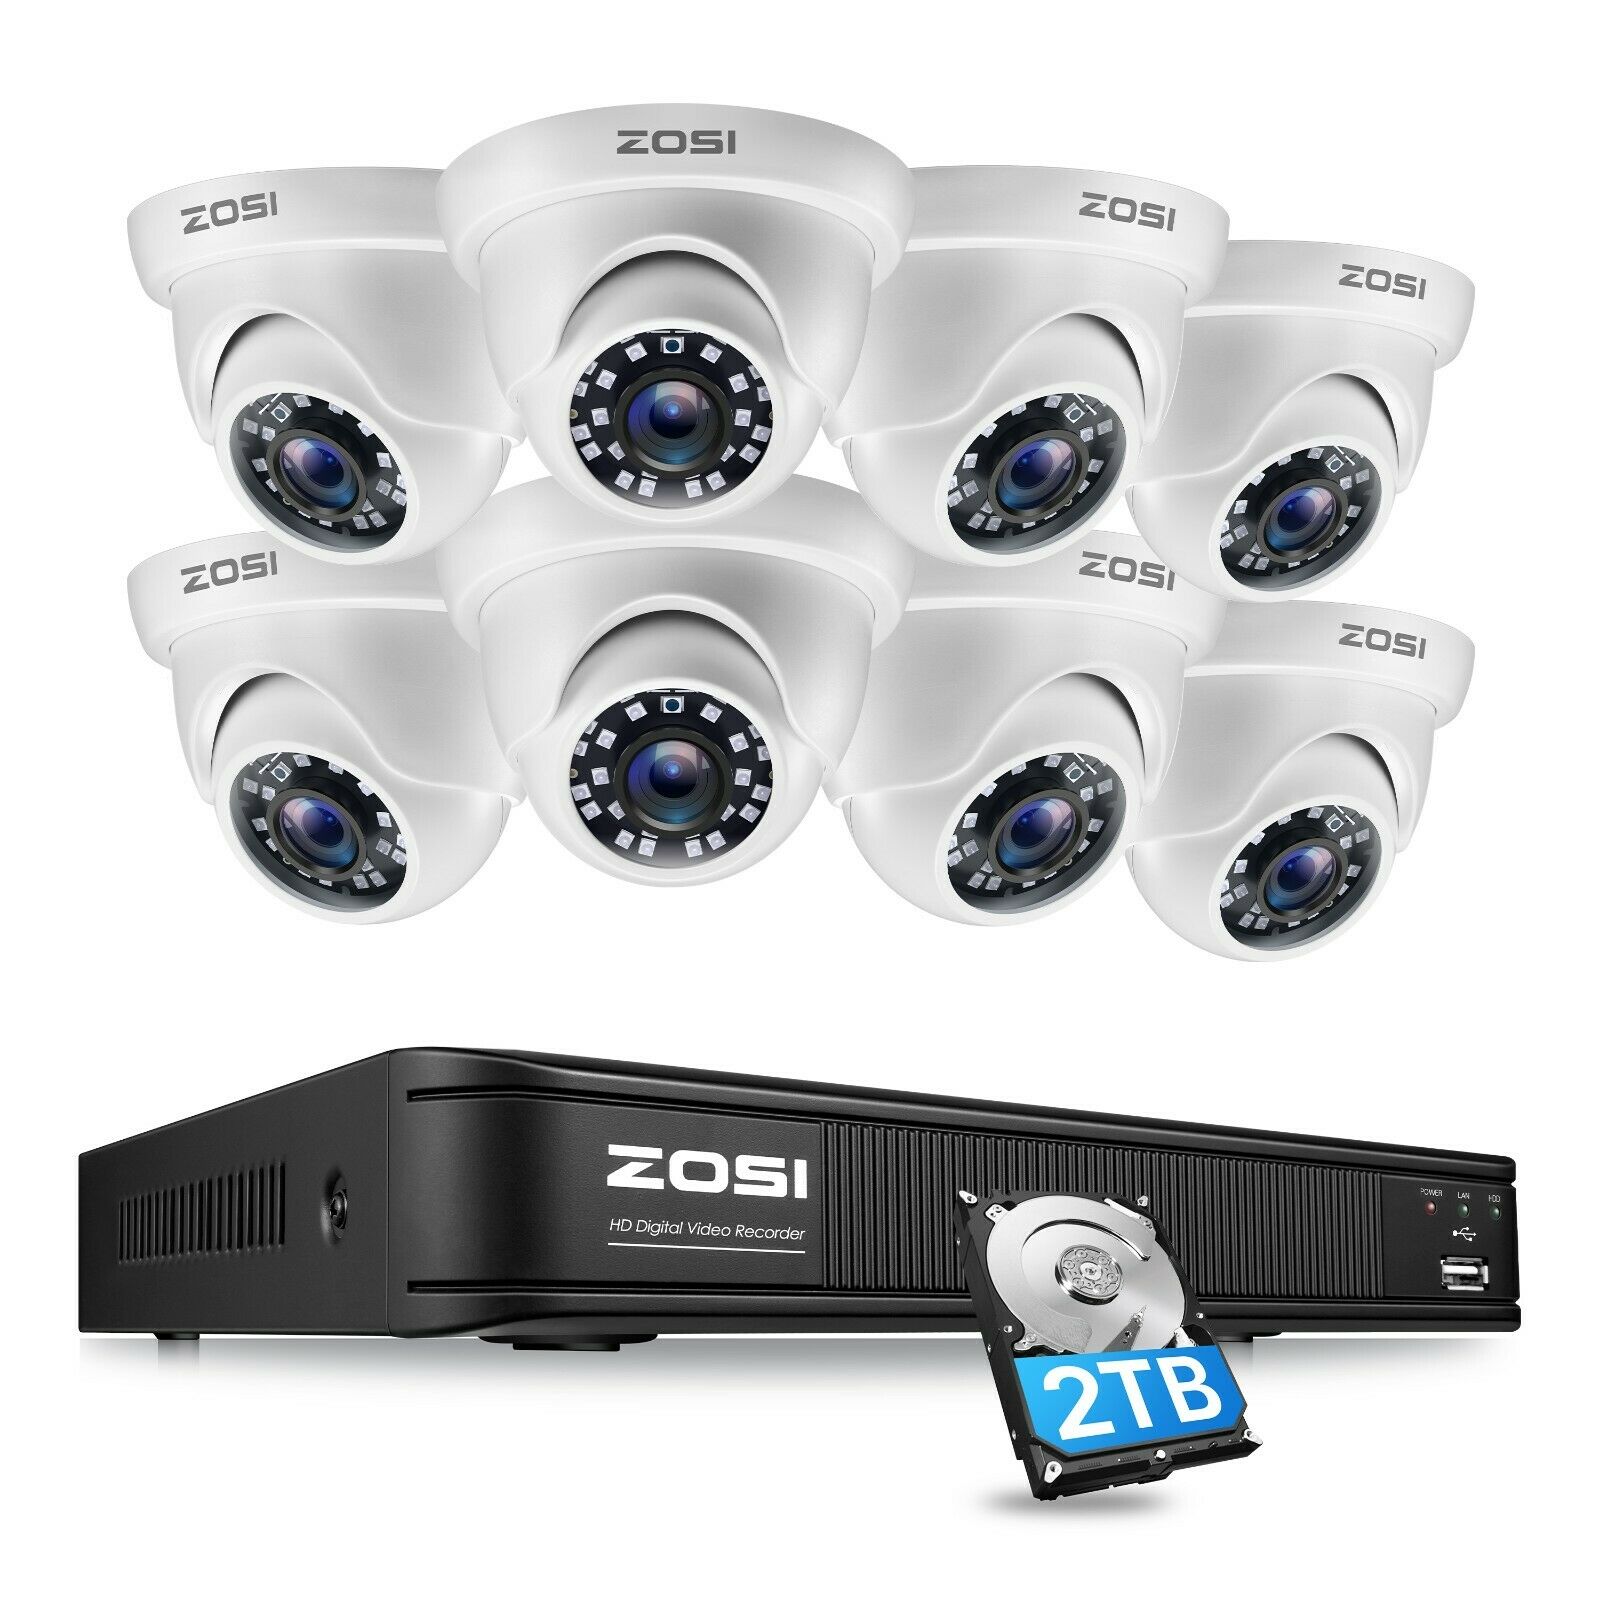 Zosi H.265+ Dvr Cctv 1080p Security Camera Outdoor Home System Motion Detection